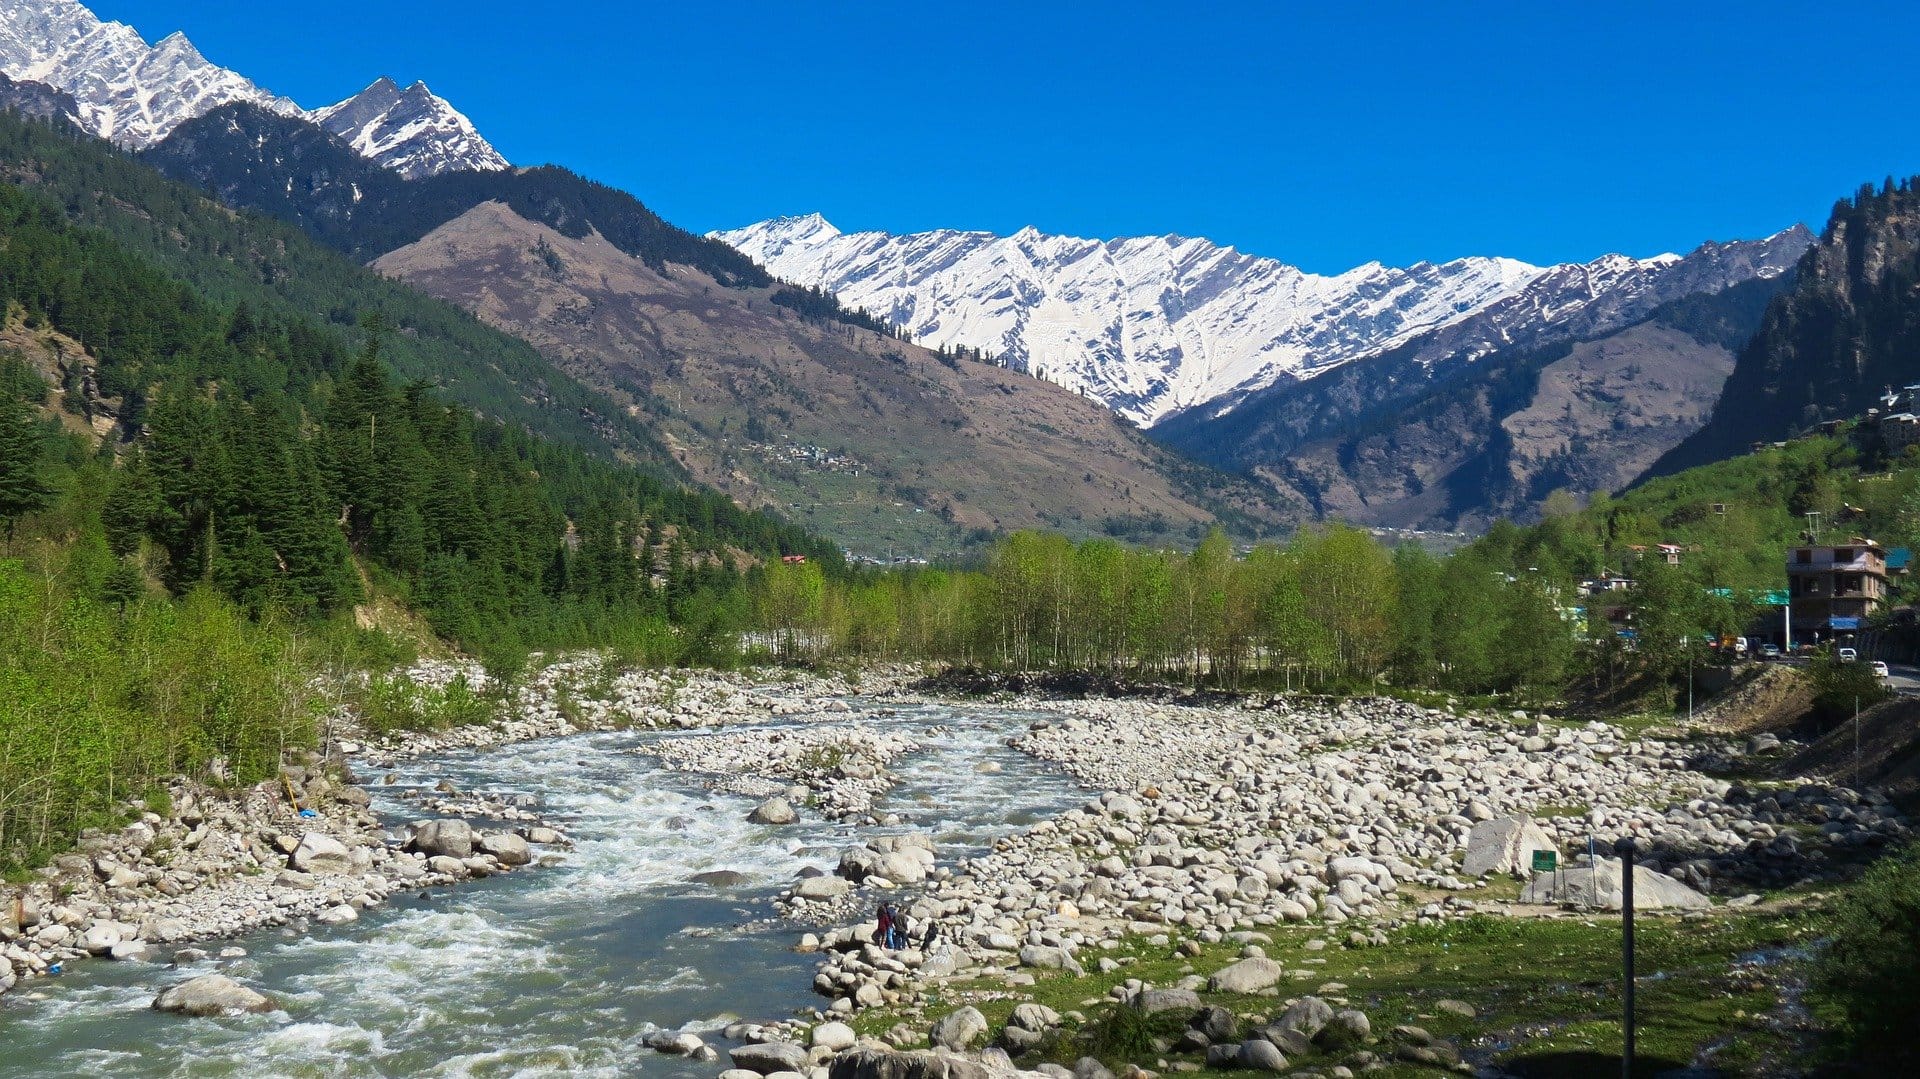 Indian Hill Station of Manali